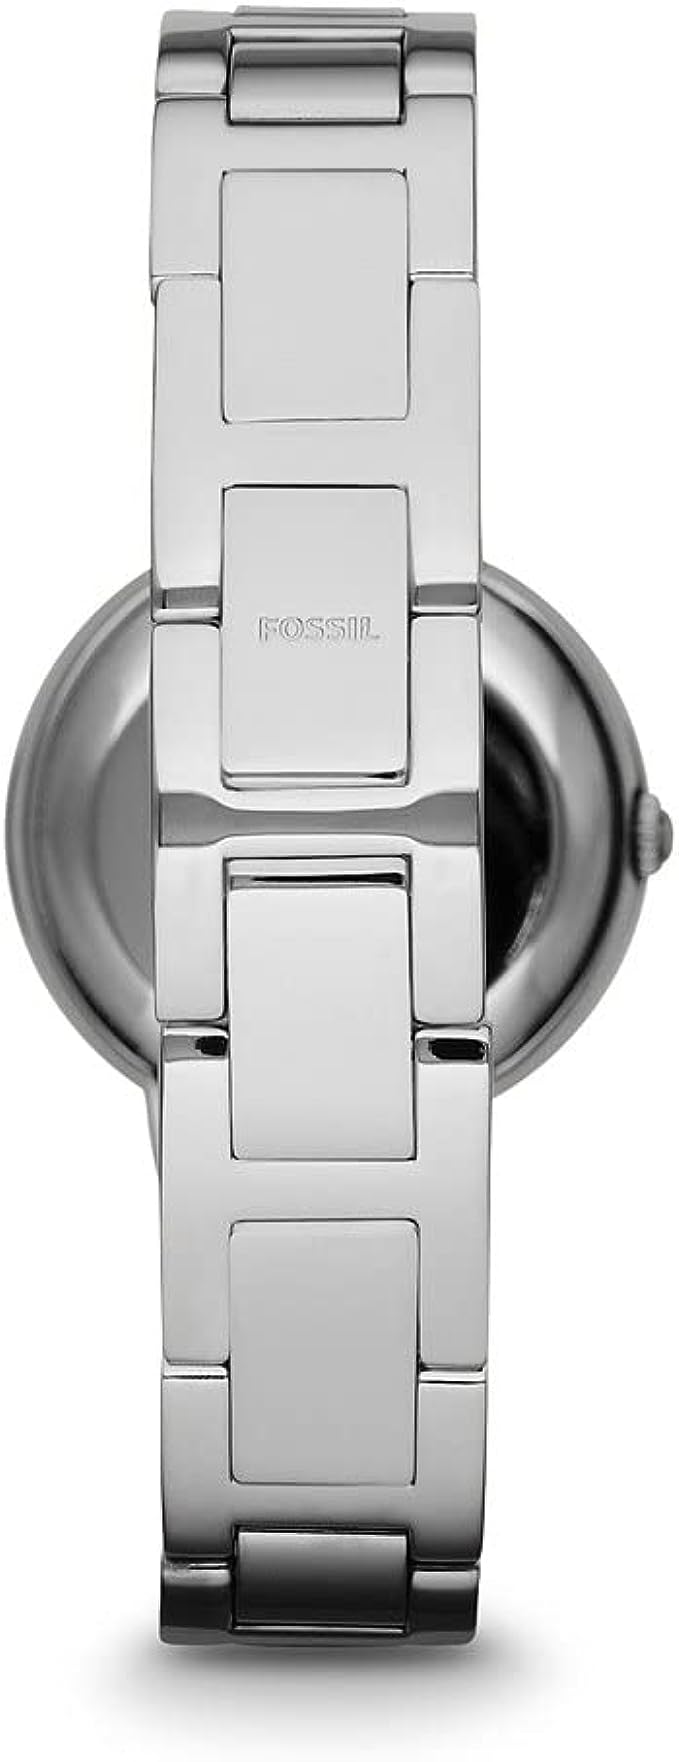 Fossil Women's Virginia Quartz Stainless Steel Dress Watch, Color Silver-Tone ES3282 - 3alababak